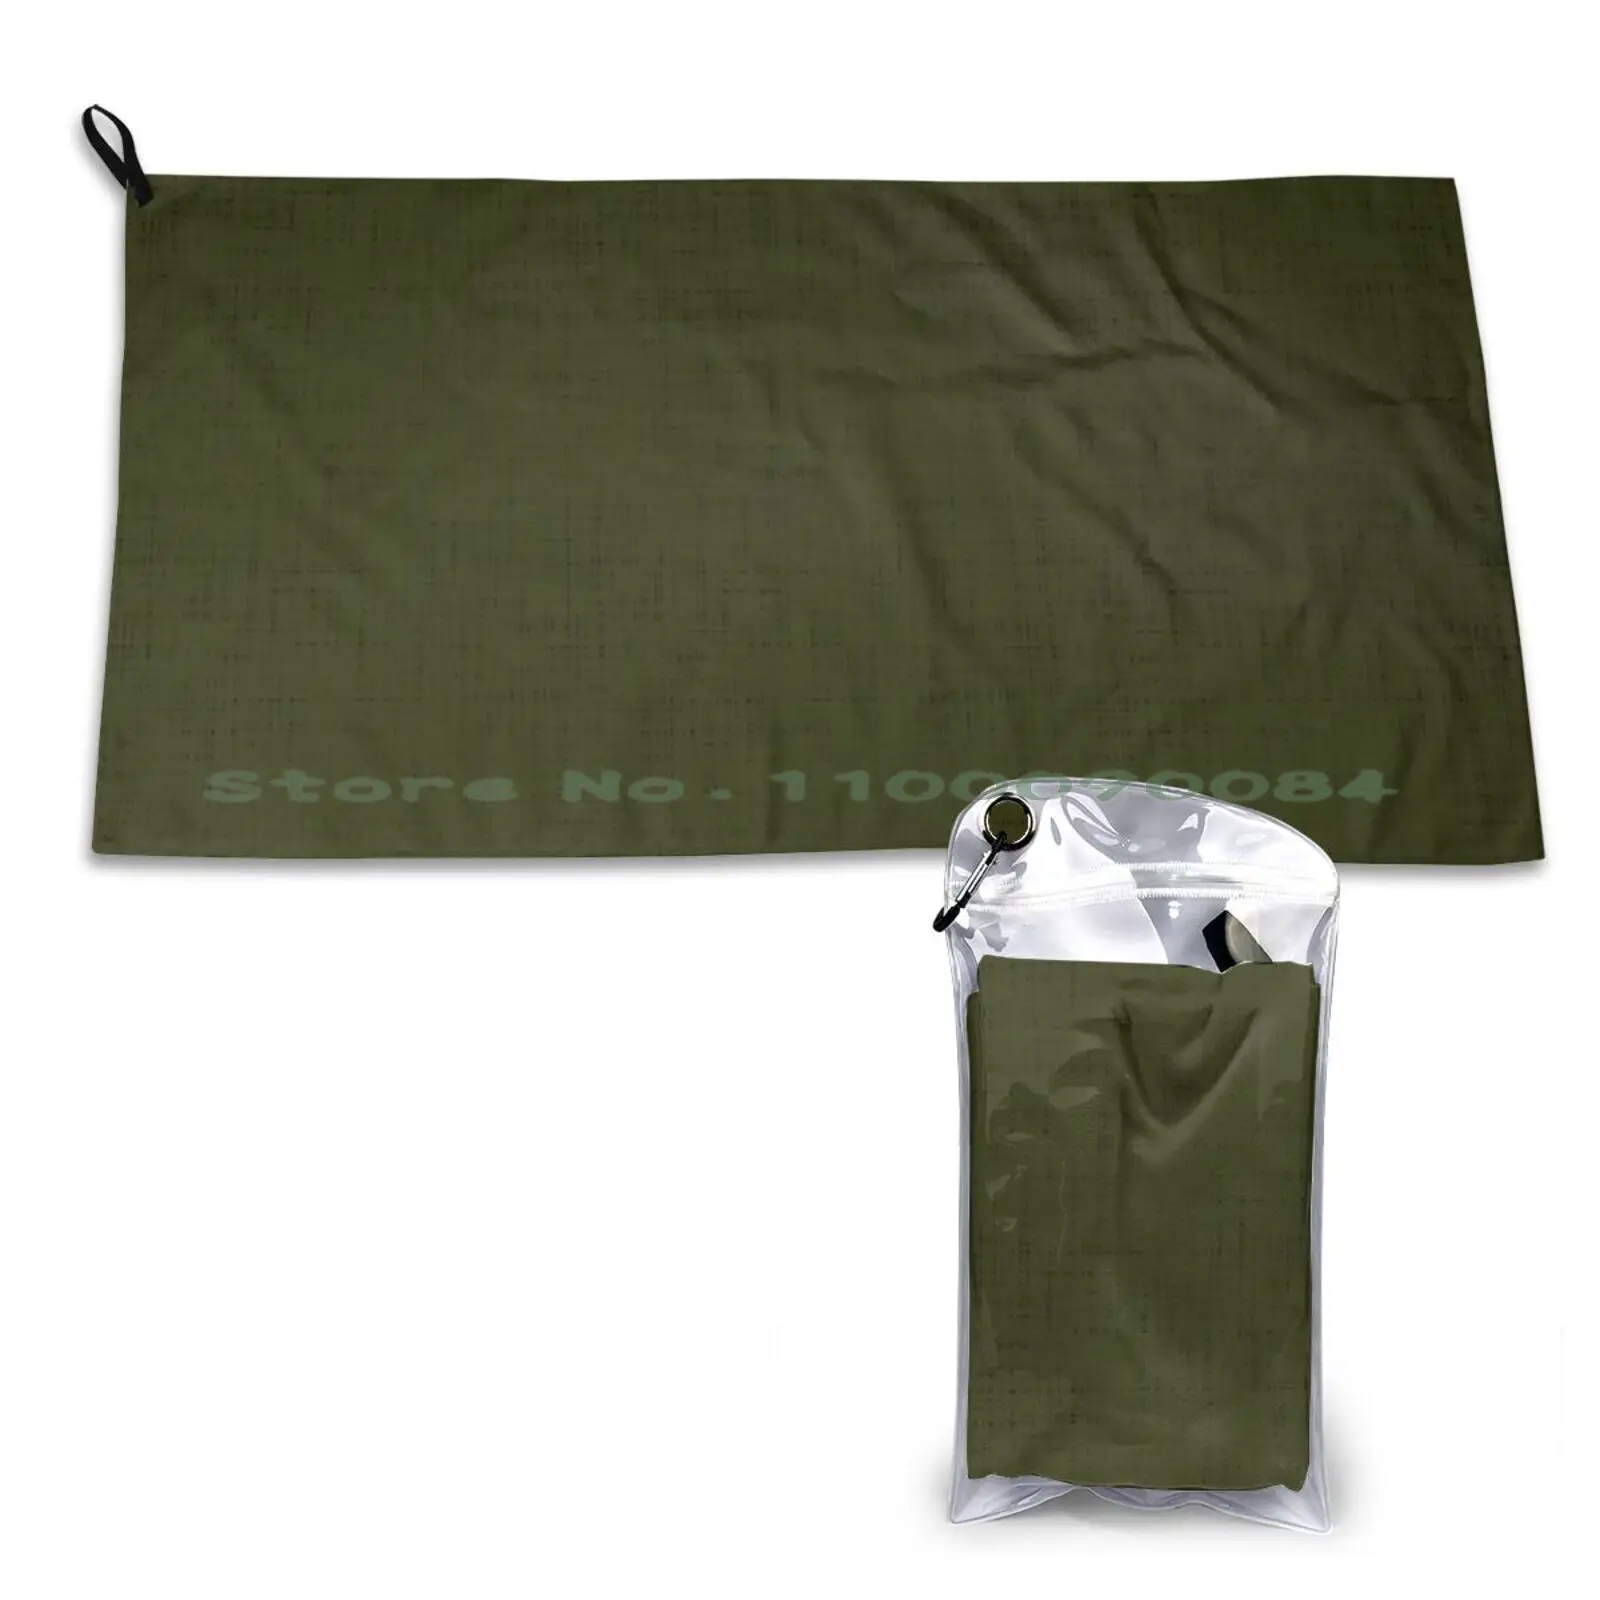 

Dark Olive Textured. Quick Dry Towel Gym Sports Bath Portable Dark Olive Olive Textured Marsh Solid Color Dark Green Simple